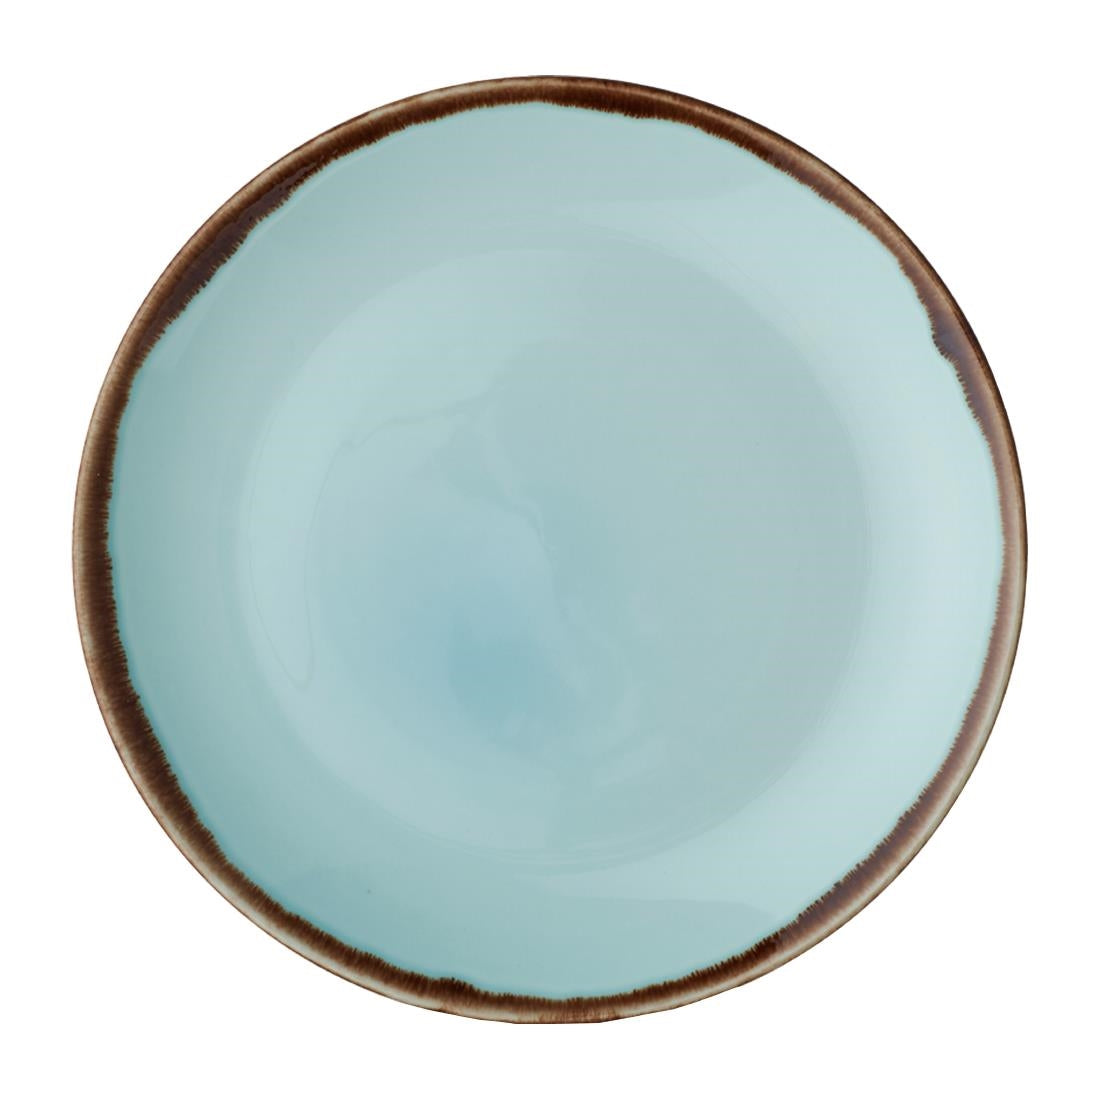 FX163 Dudson Harvest Coupe Plates Turquoise 260mm (Pack of 12) JD Catering Equipment Solutions Ltd